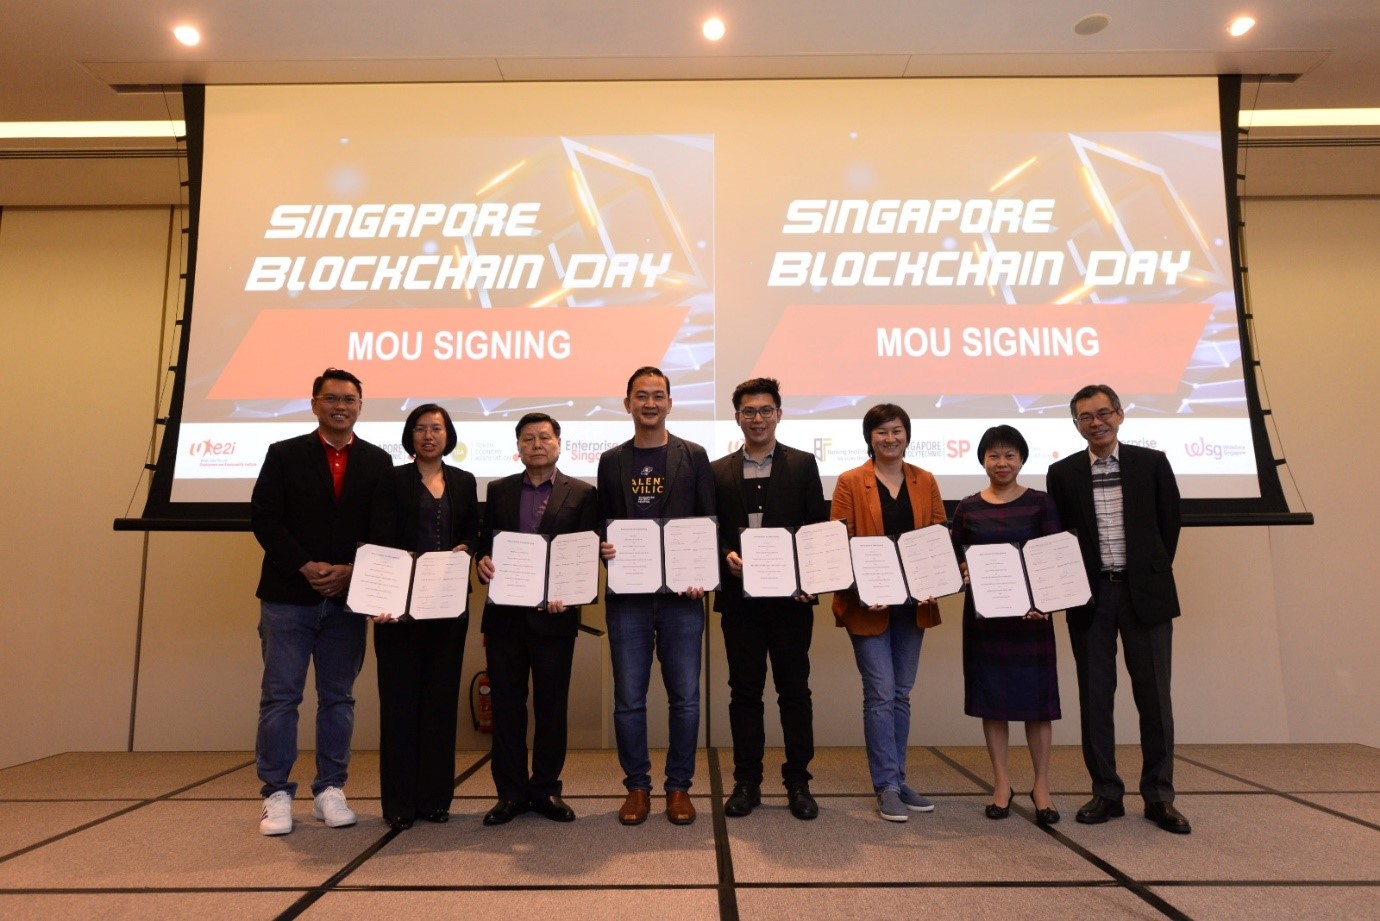 New courses by Singapore Polytechnic (SP) and Token Economy Association (TEA) to equip workforce with Blockchain skills